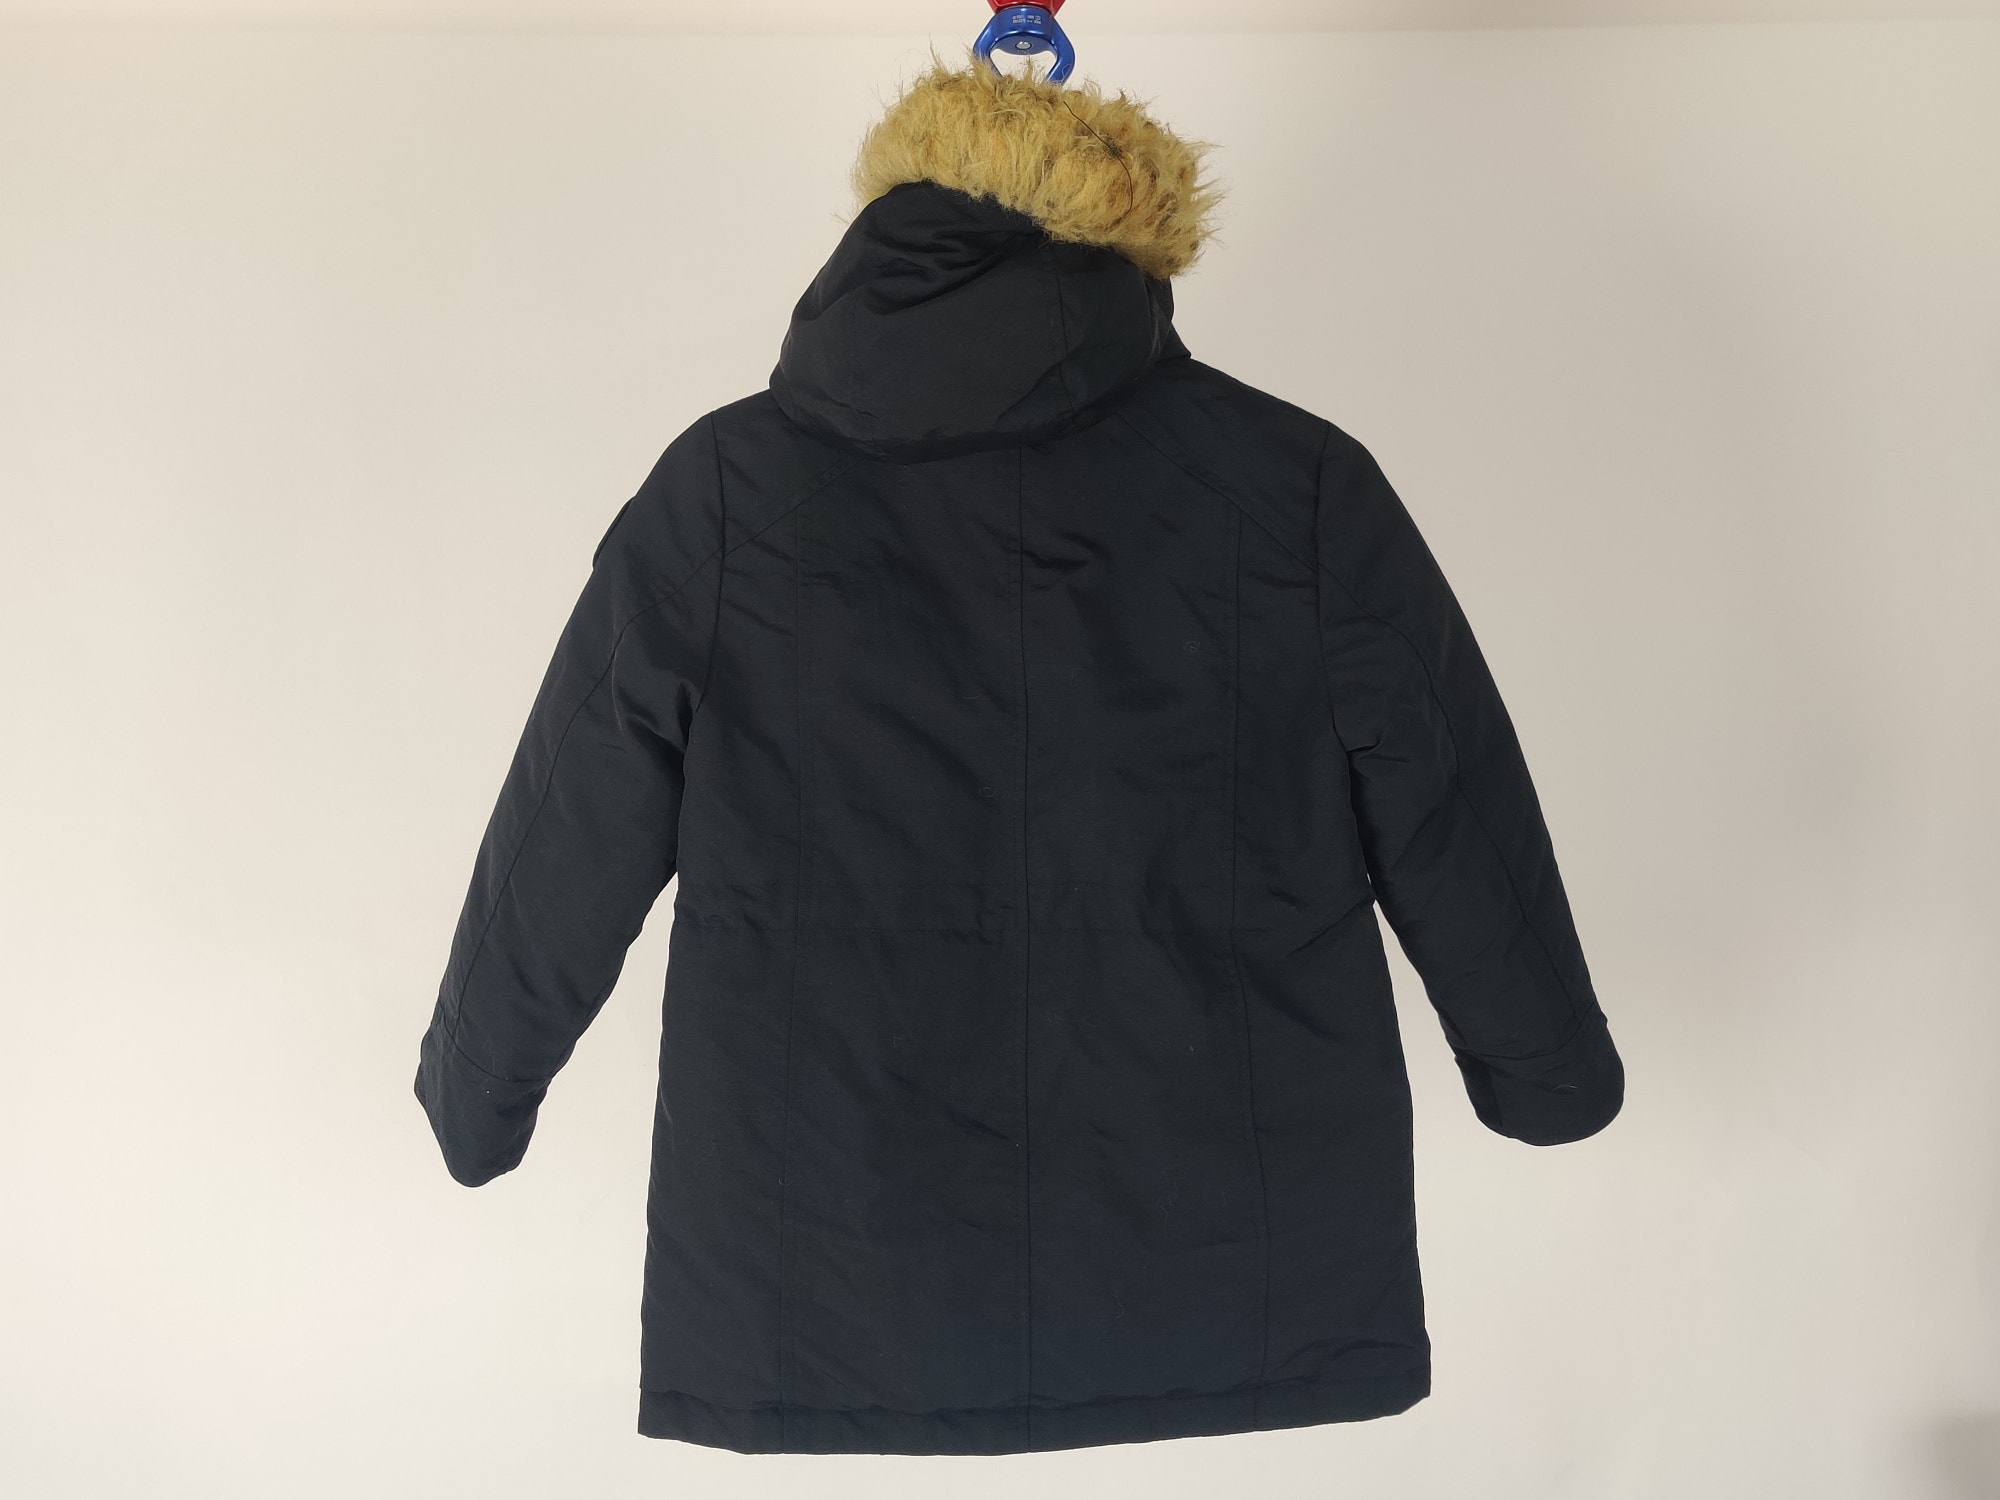 OROLAY KIDS DUCK DOWN HOOD GIRL'S BLACK POCKETS KID'S JACKET SIZE 6-7Y - Picture 6 of 12